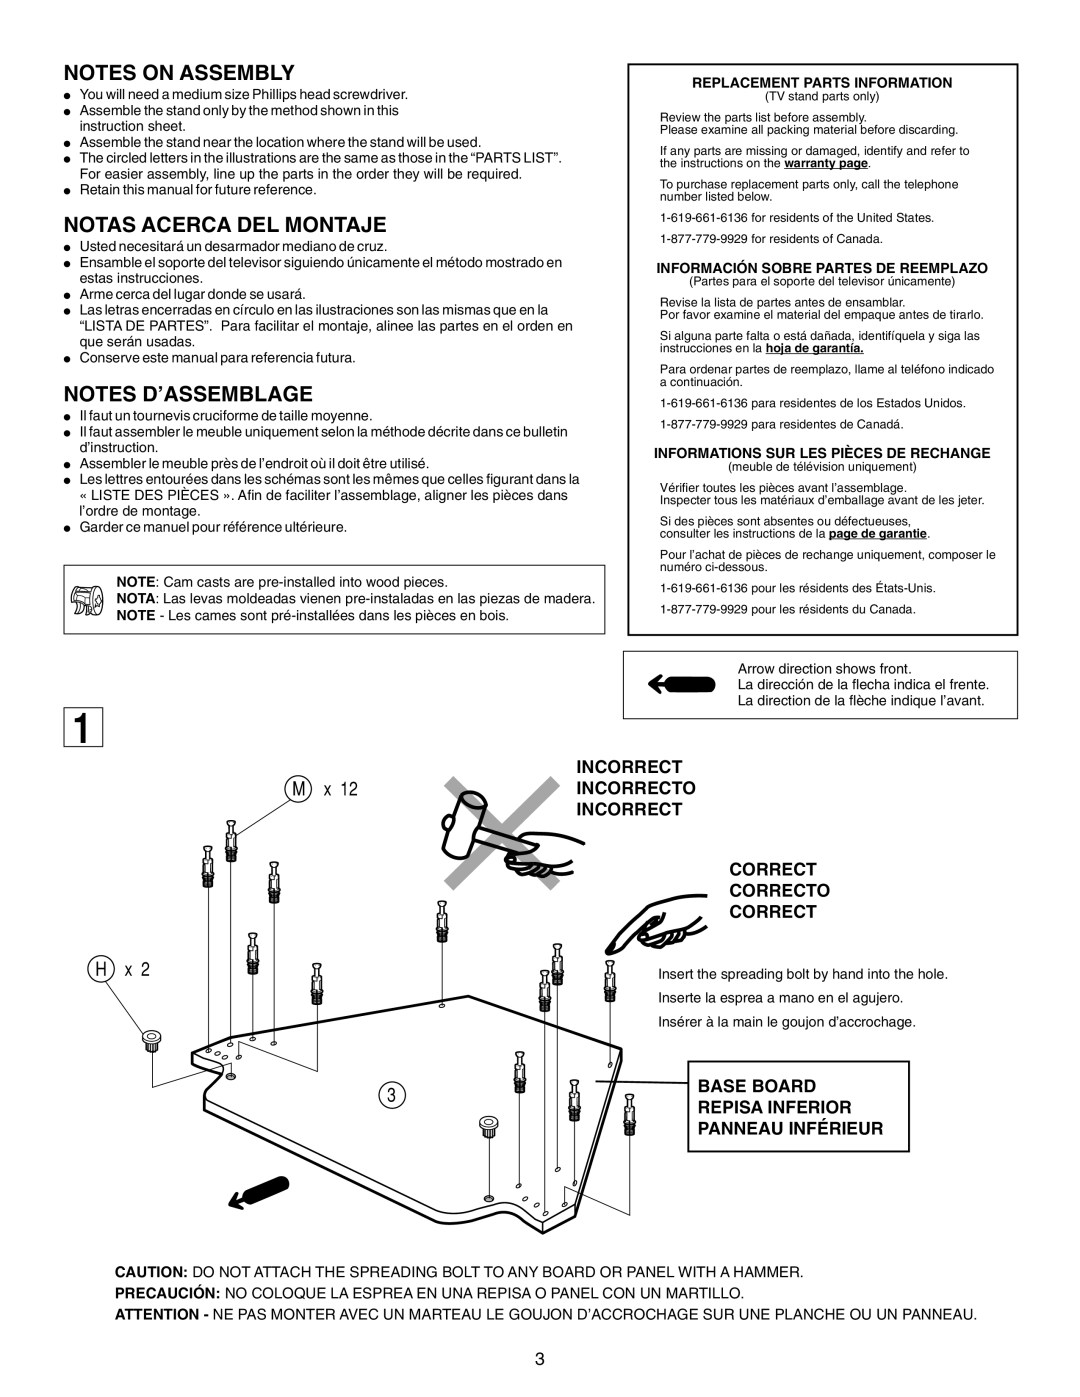 Sony SU-32FS2 manual Notes On Assembly, Notas Acerca Del Montaje, Notes D’Assemblage, H, Replacement Parts Information 